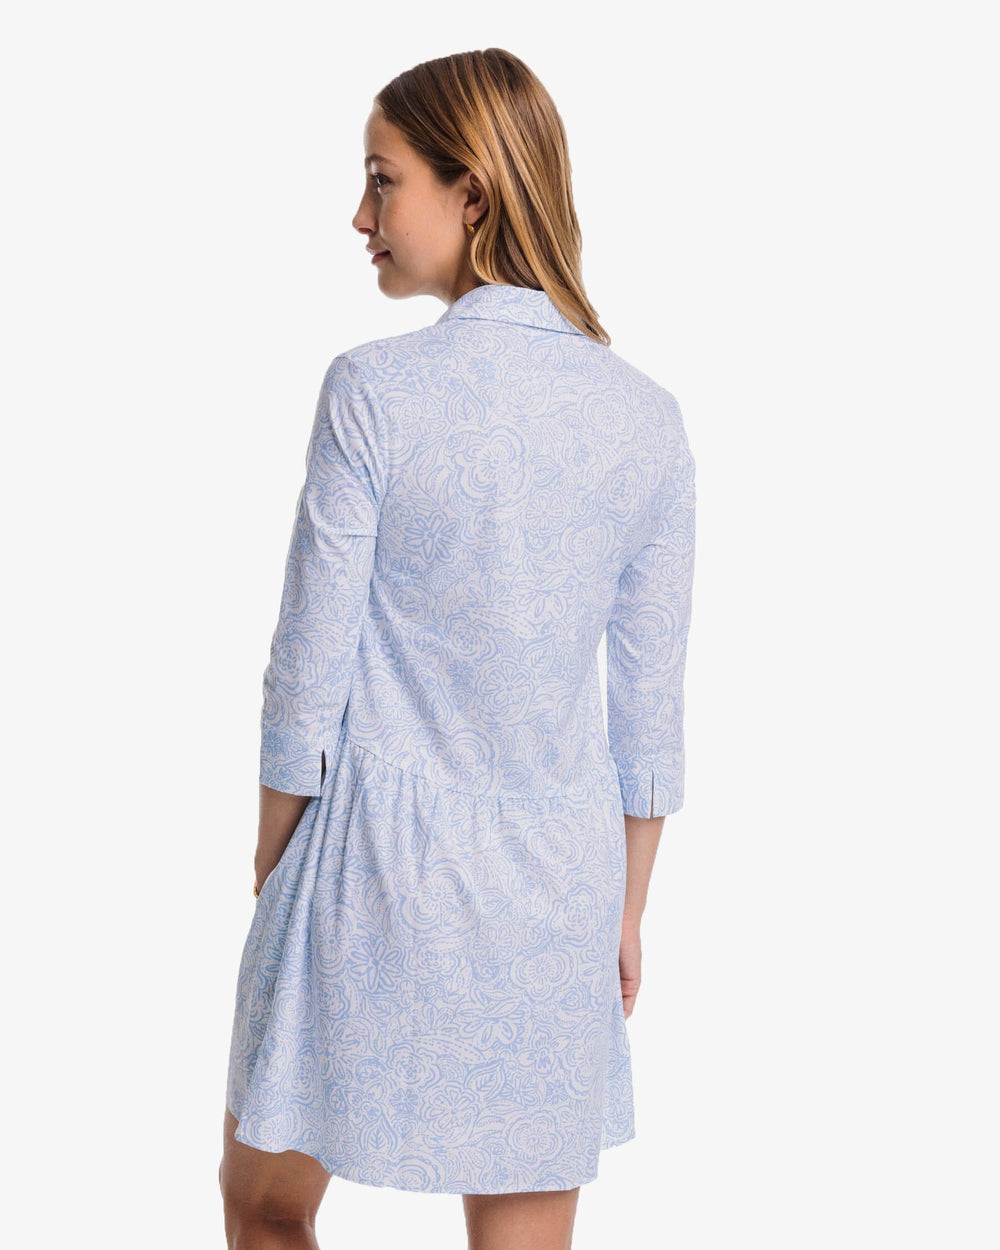 The back view of the Southern Tide Cara Brrr Forever Floral Dress by Southern Tide - Sky Blue